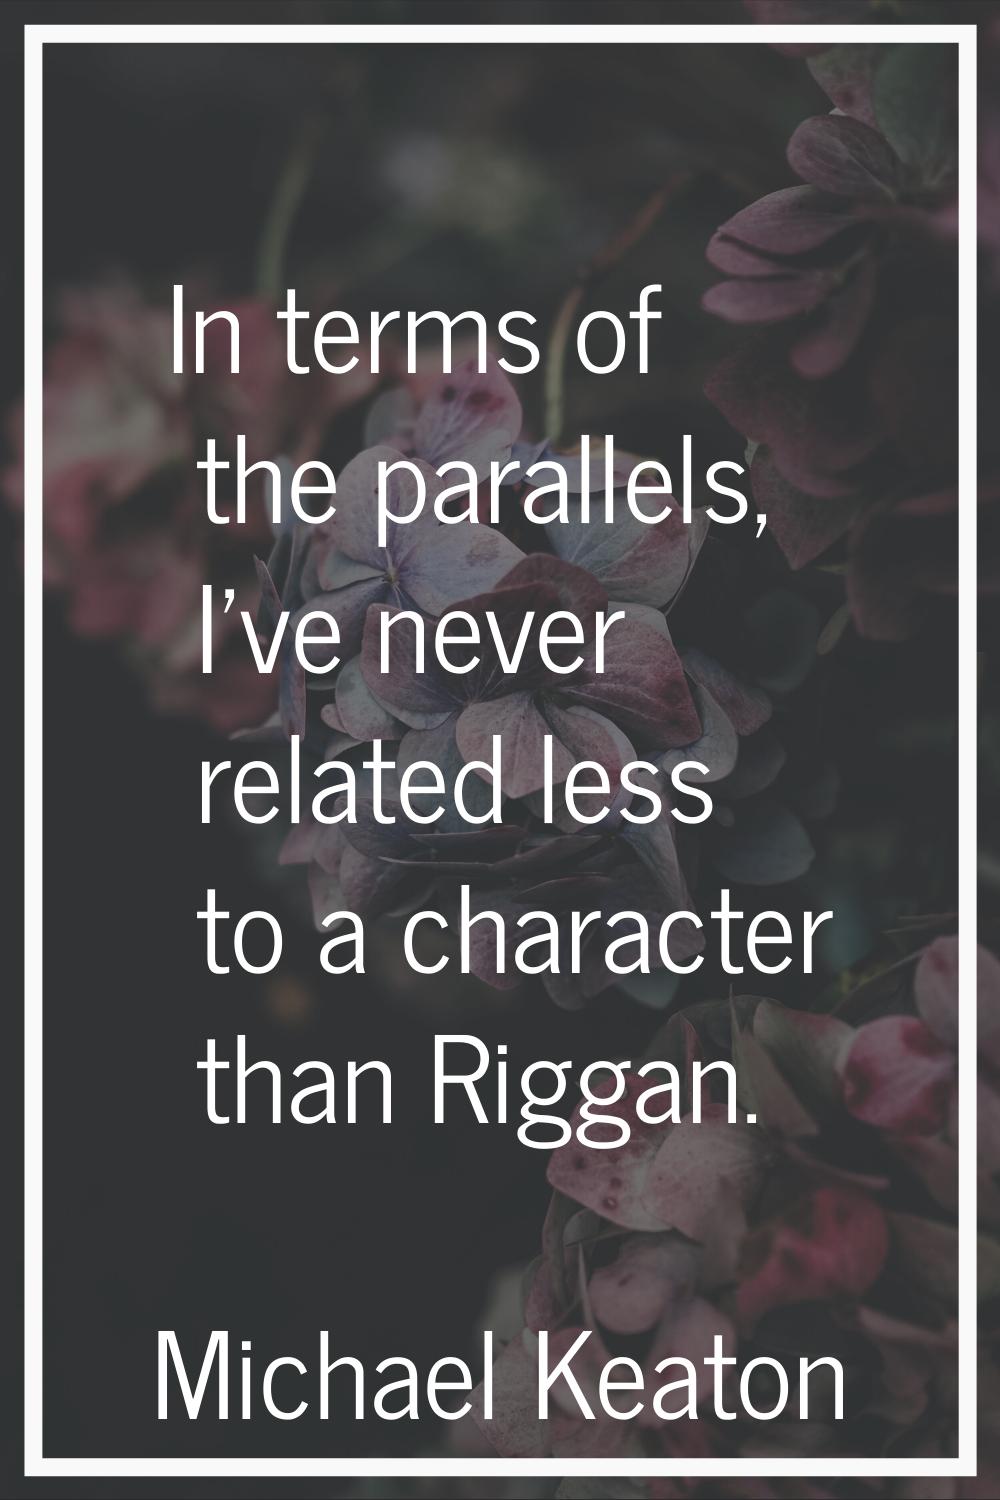 In terms of the parallels, I've never related less to a character than Riggan.